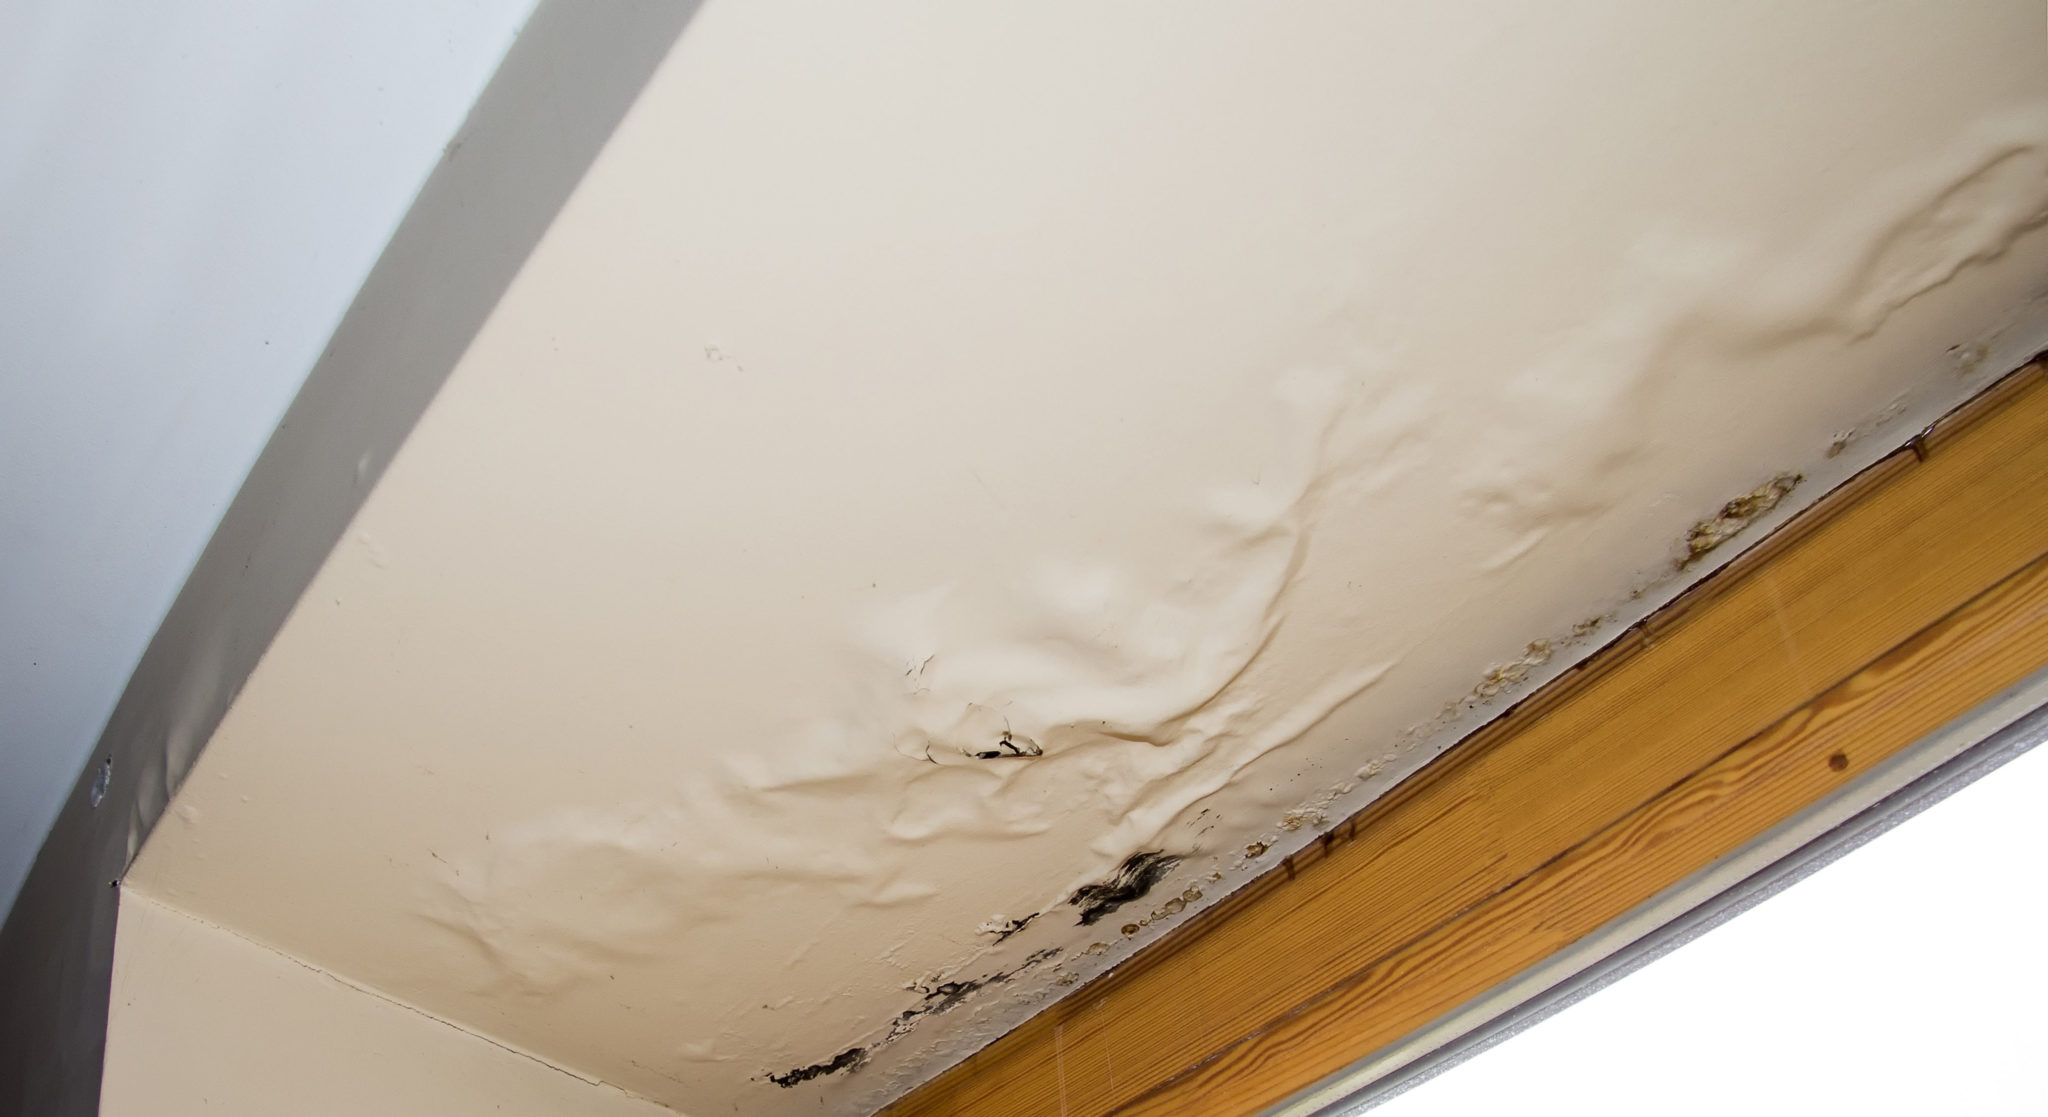 water damage that caused celing bubbling as a result of a rood leak